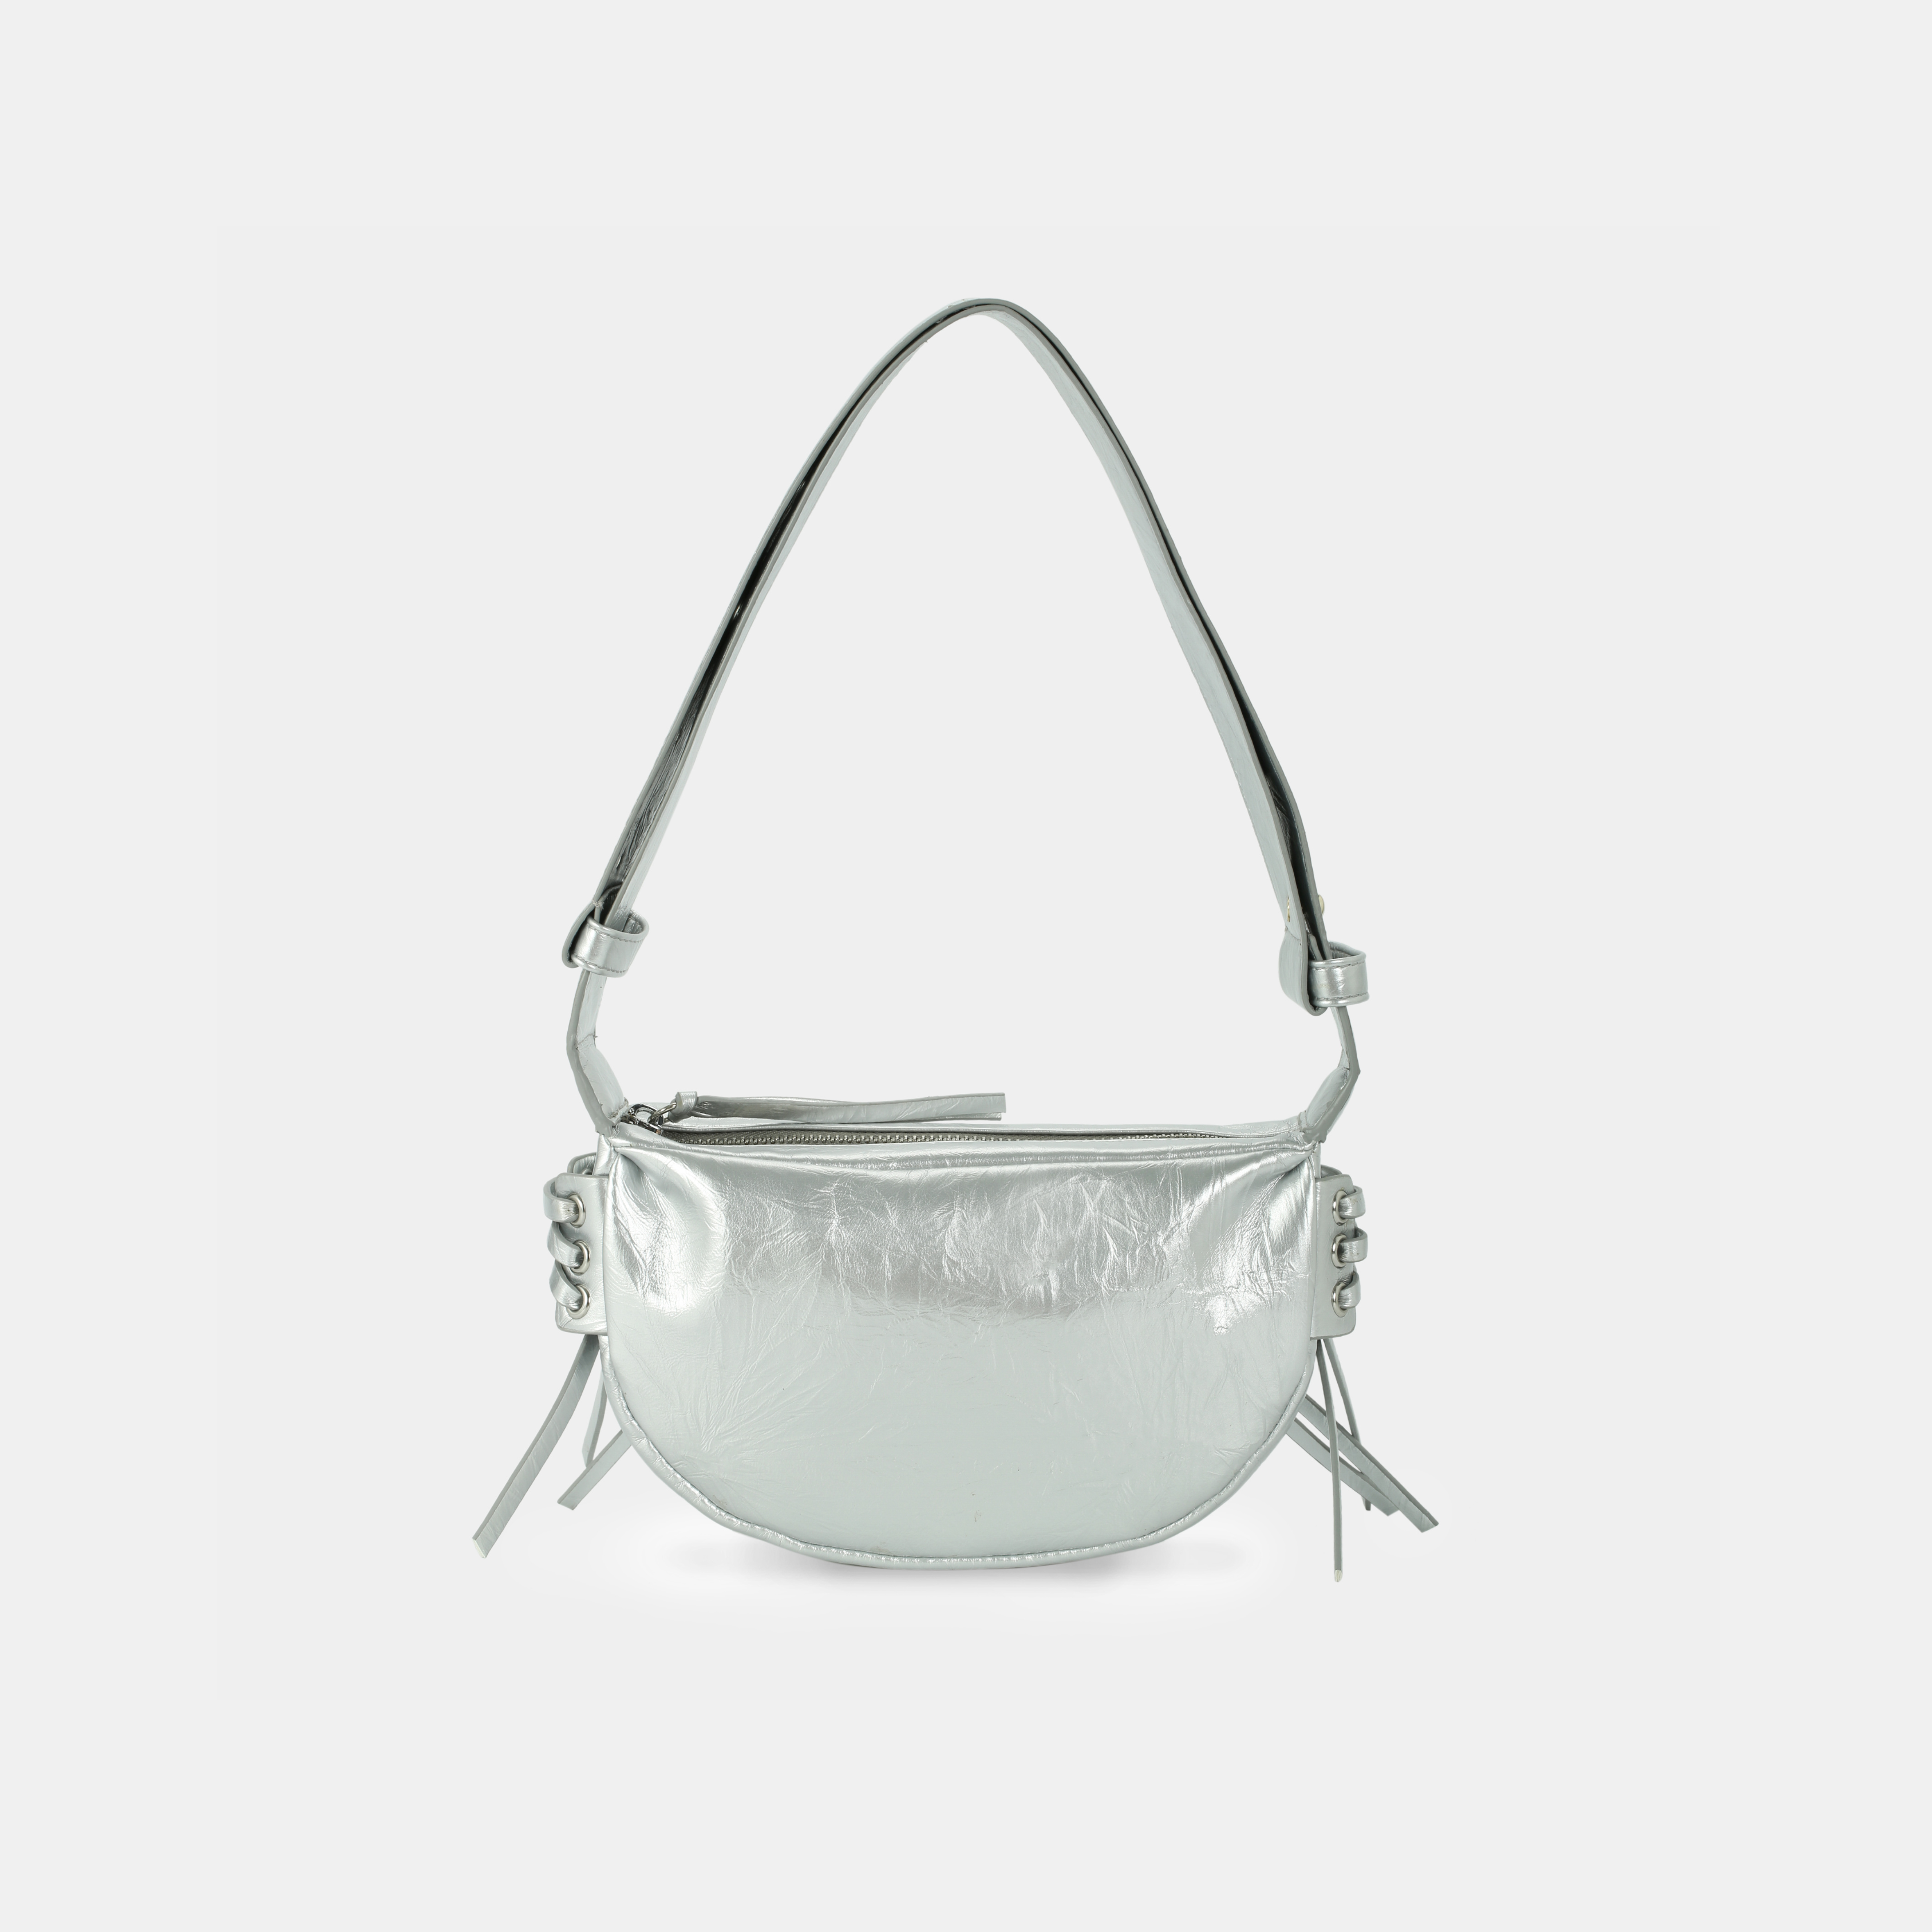 LACE bag small size (S) silver